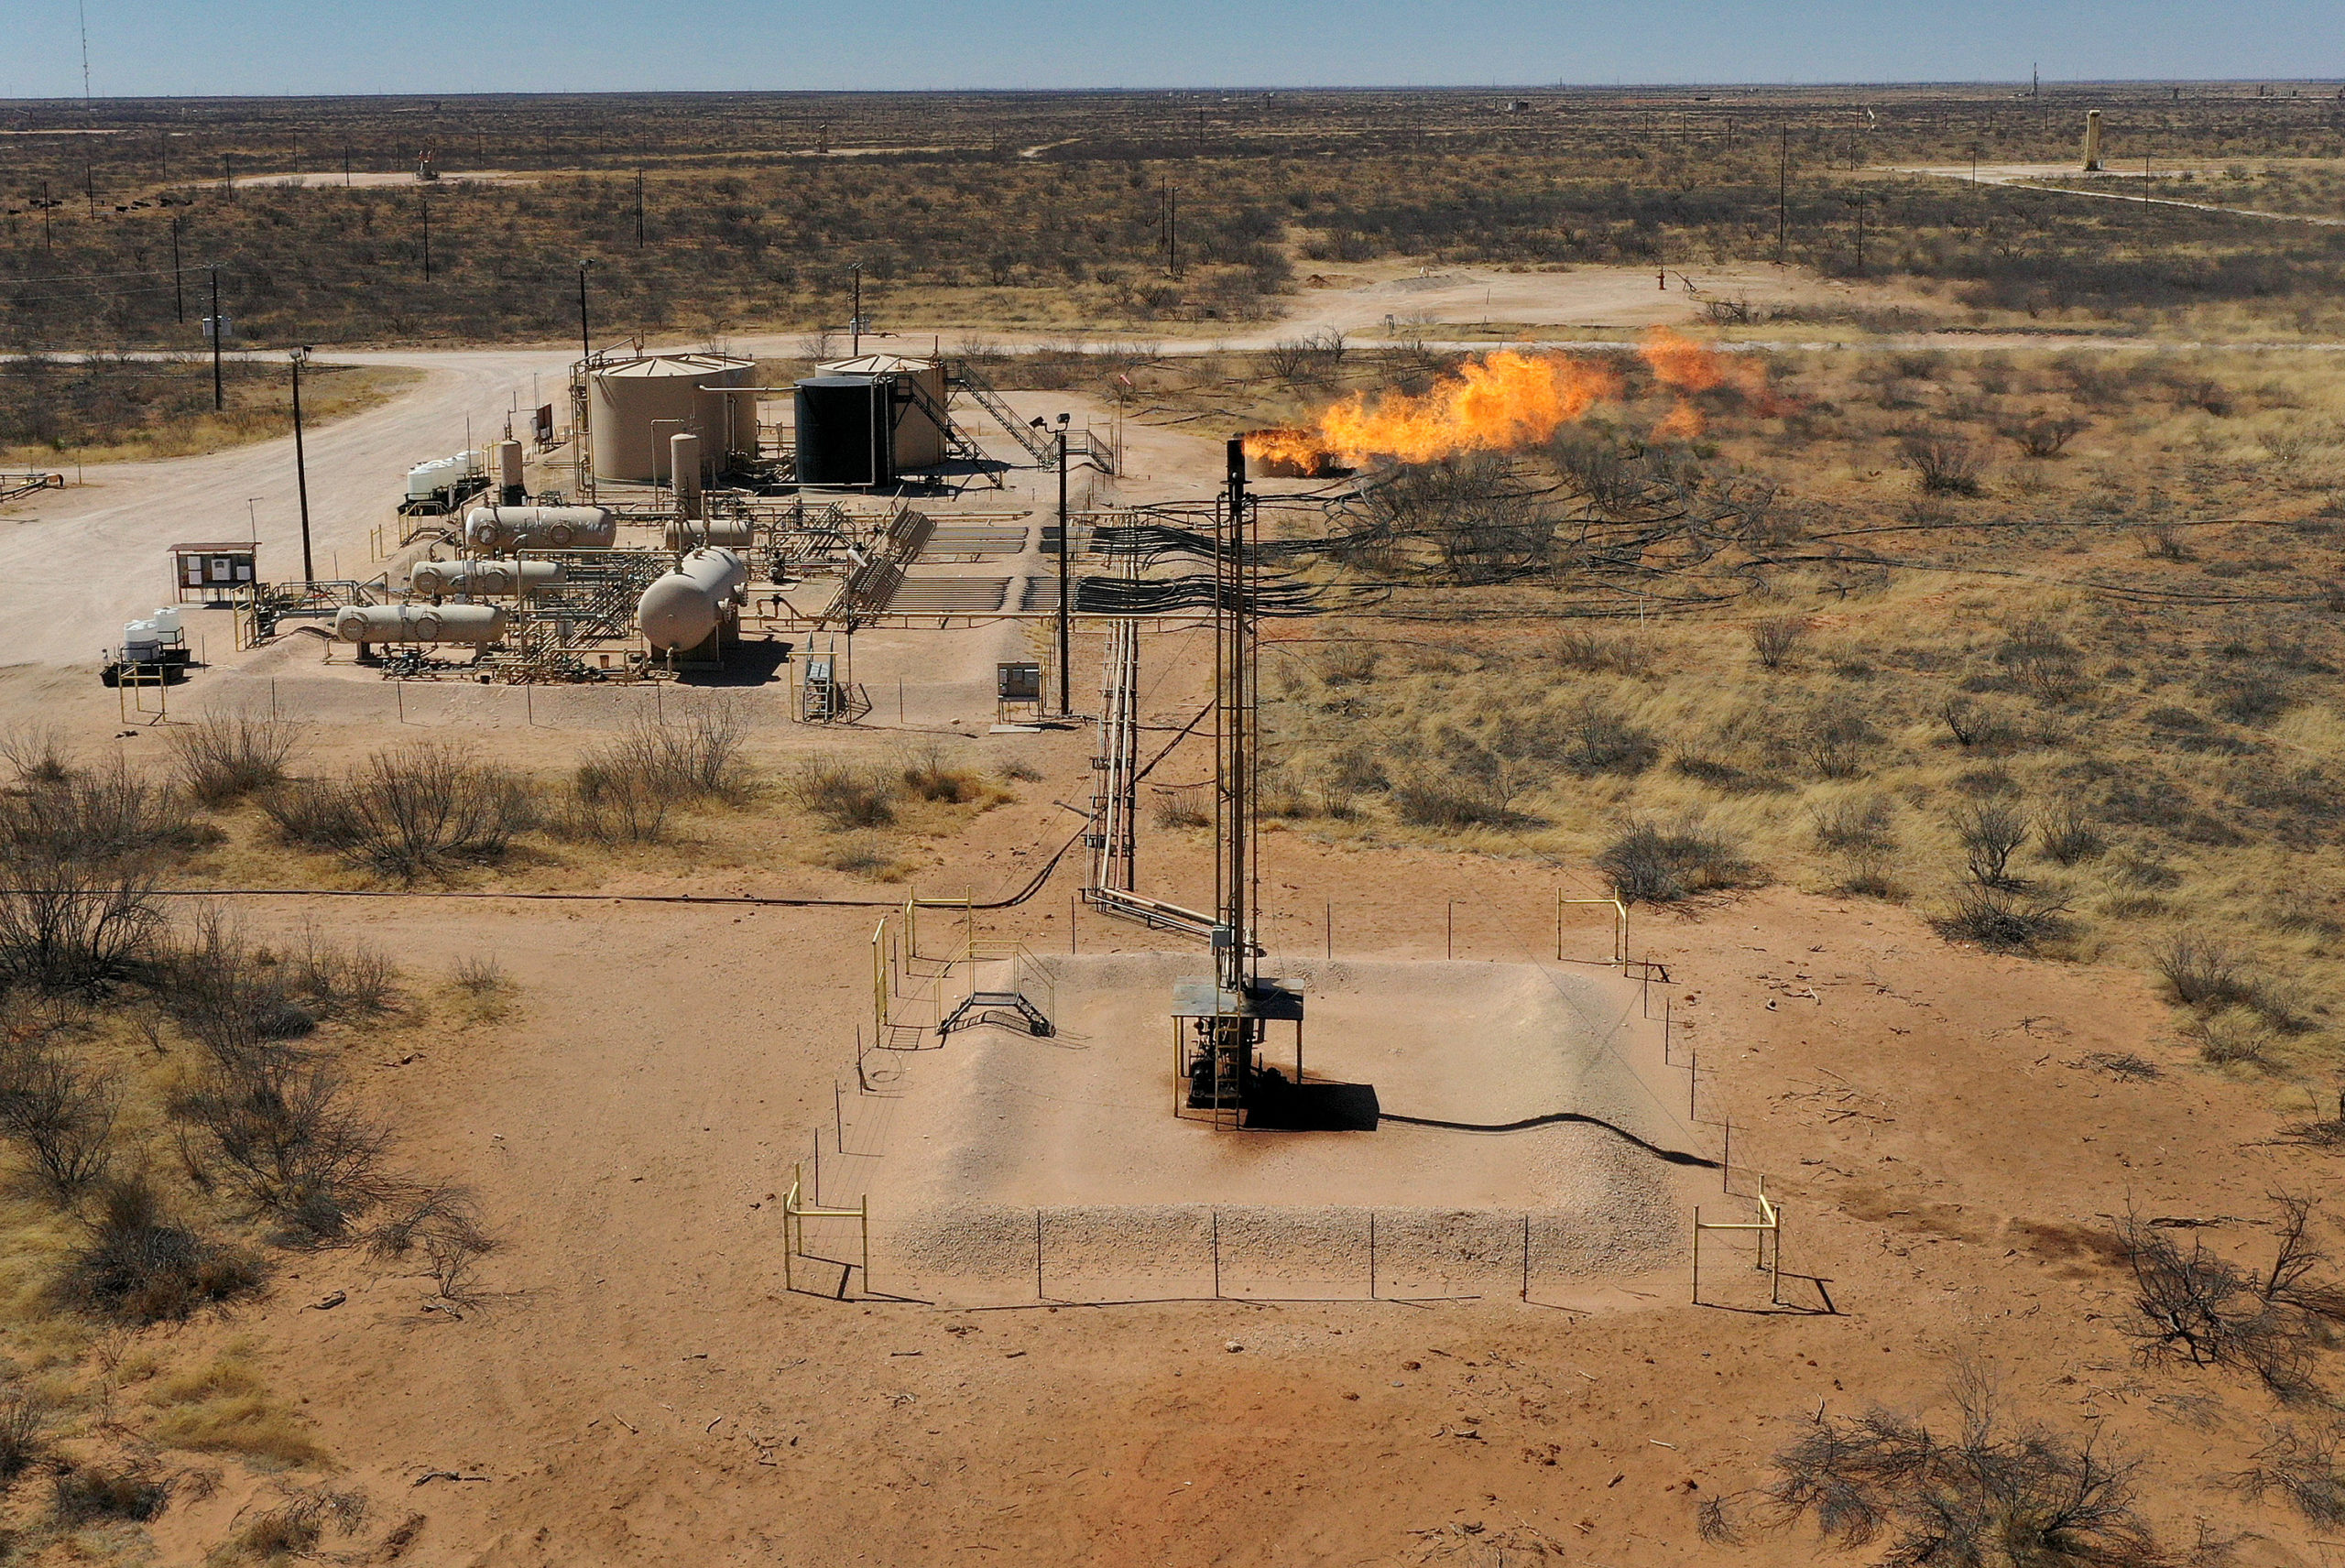 Natural gas is flared off in the Permian Basin oil field on March 12 in Andrews, Texas. (Joe Raedle/Getty Images)